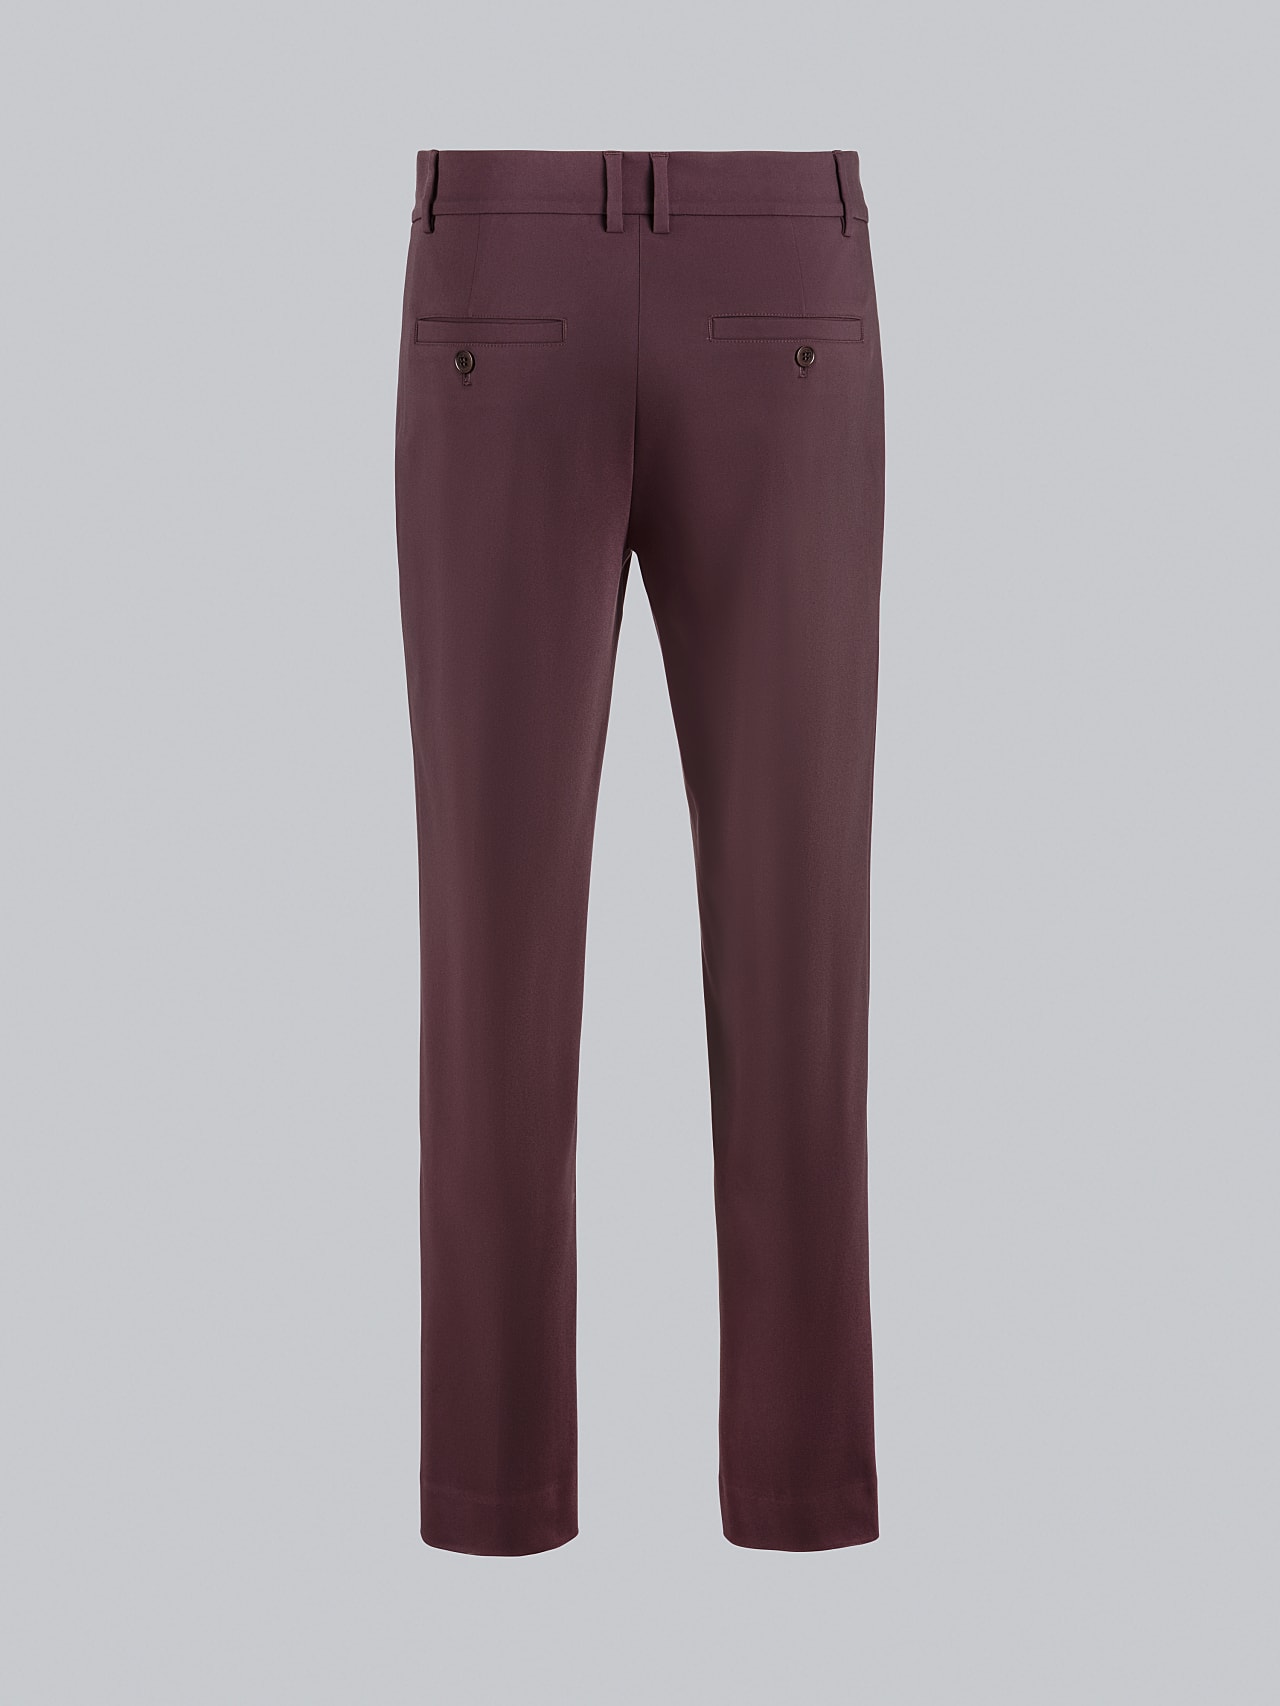 AlphaTauri | PELAN V1.Y5.02 | Tapered Pants with Pleats in Burgundy for Men